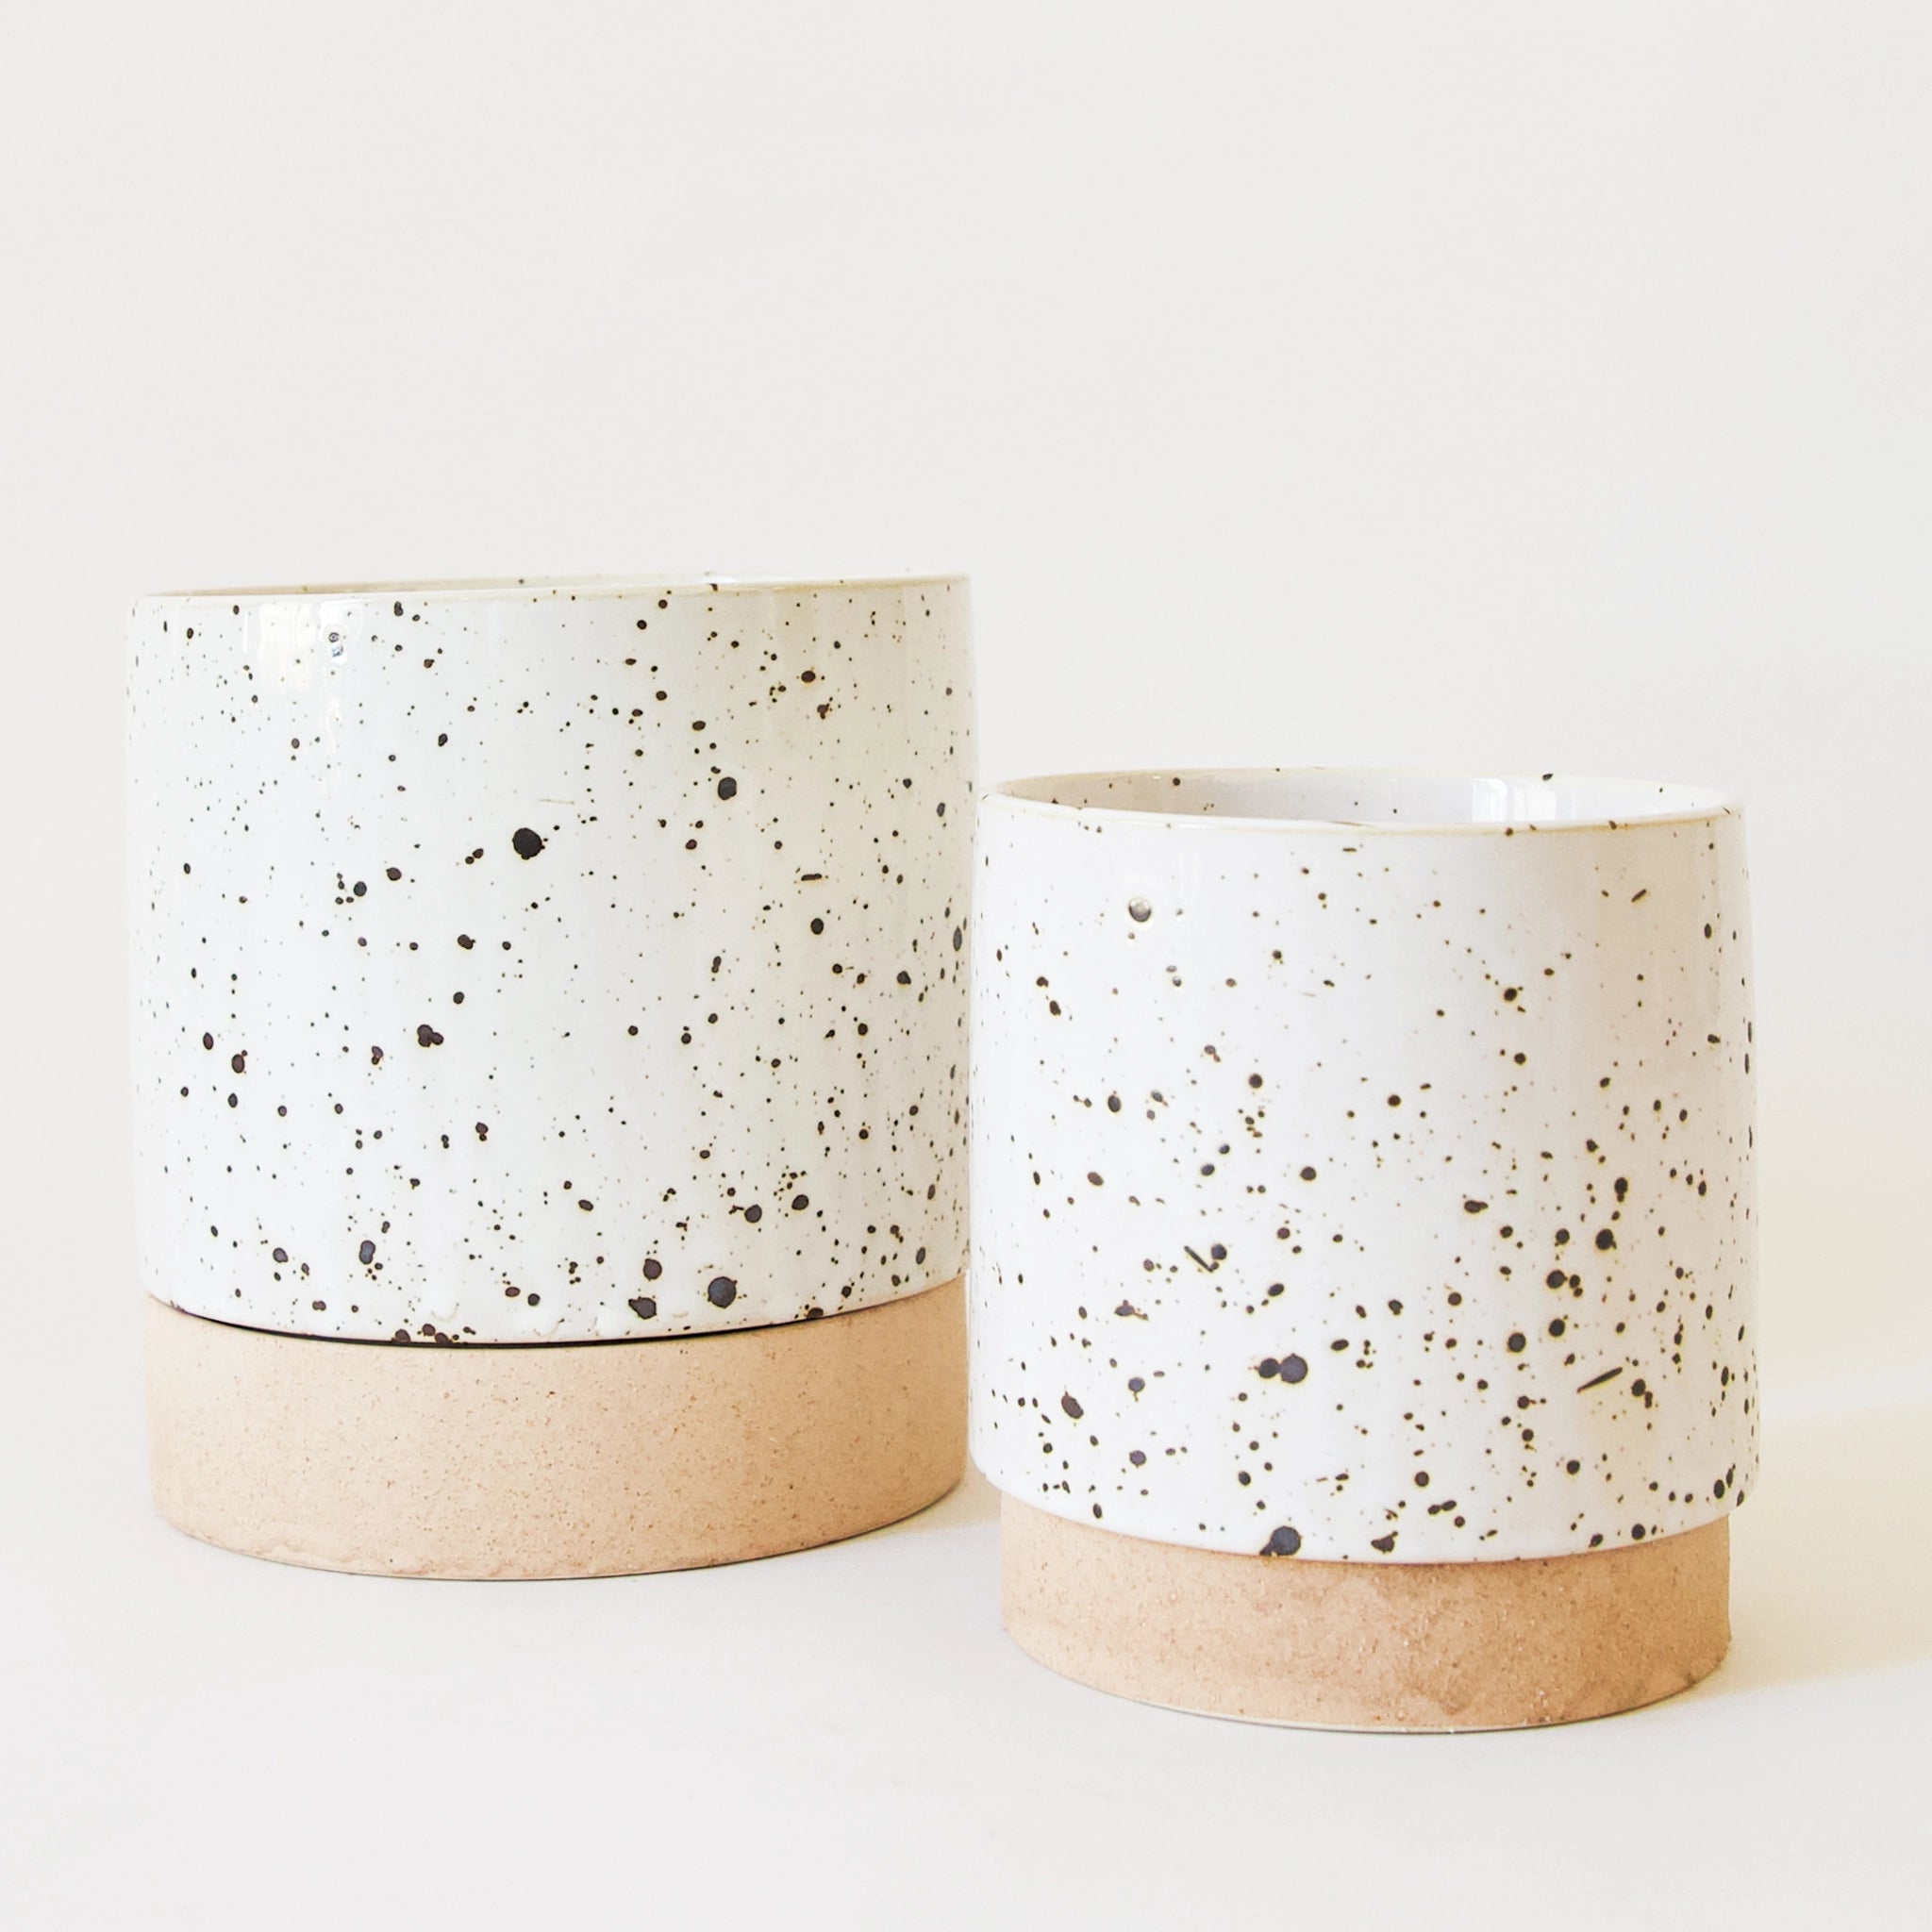 two pots, a small and large, feature dark speckles on a white glaze finish. both have a stoneware base.